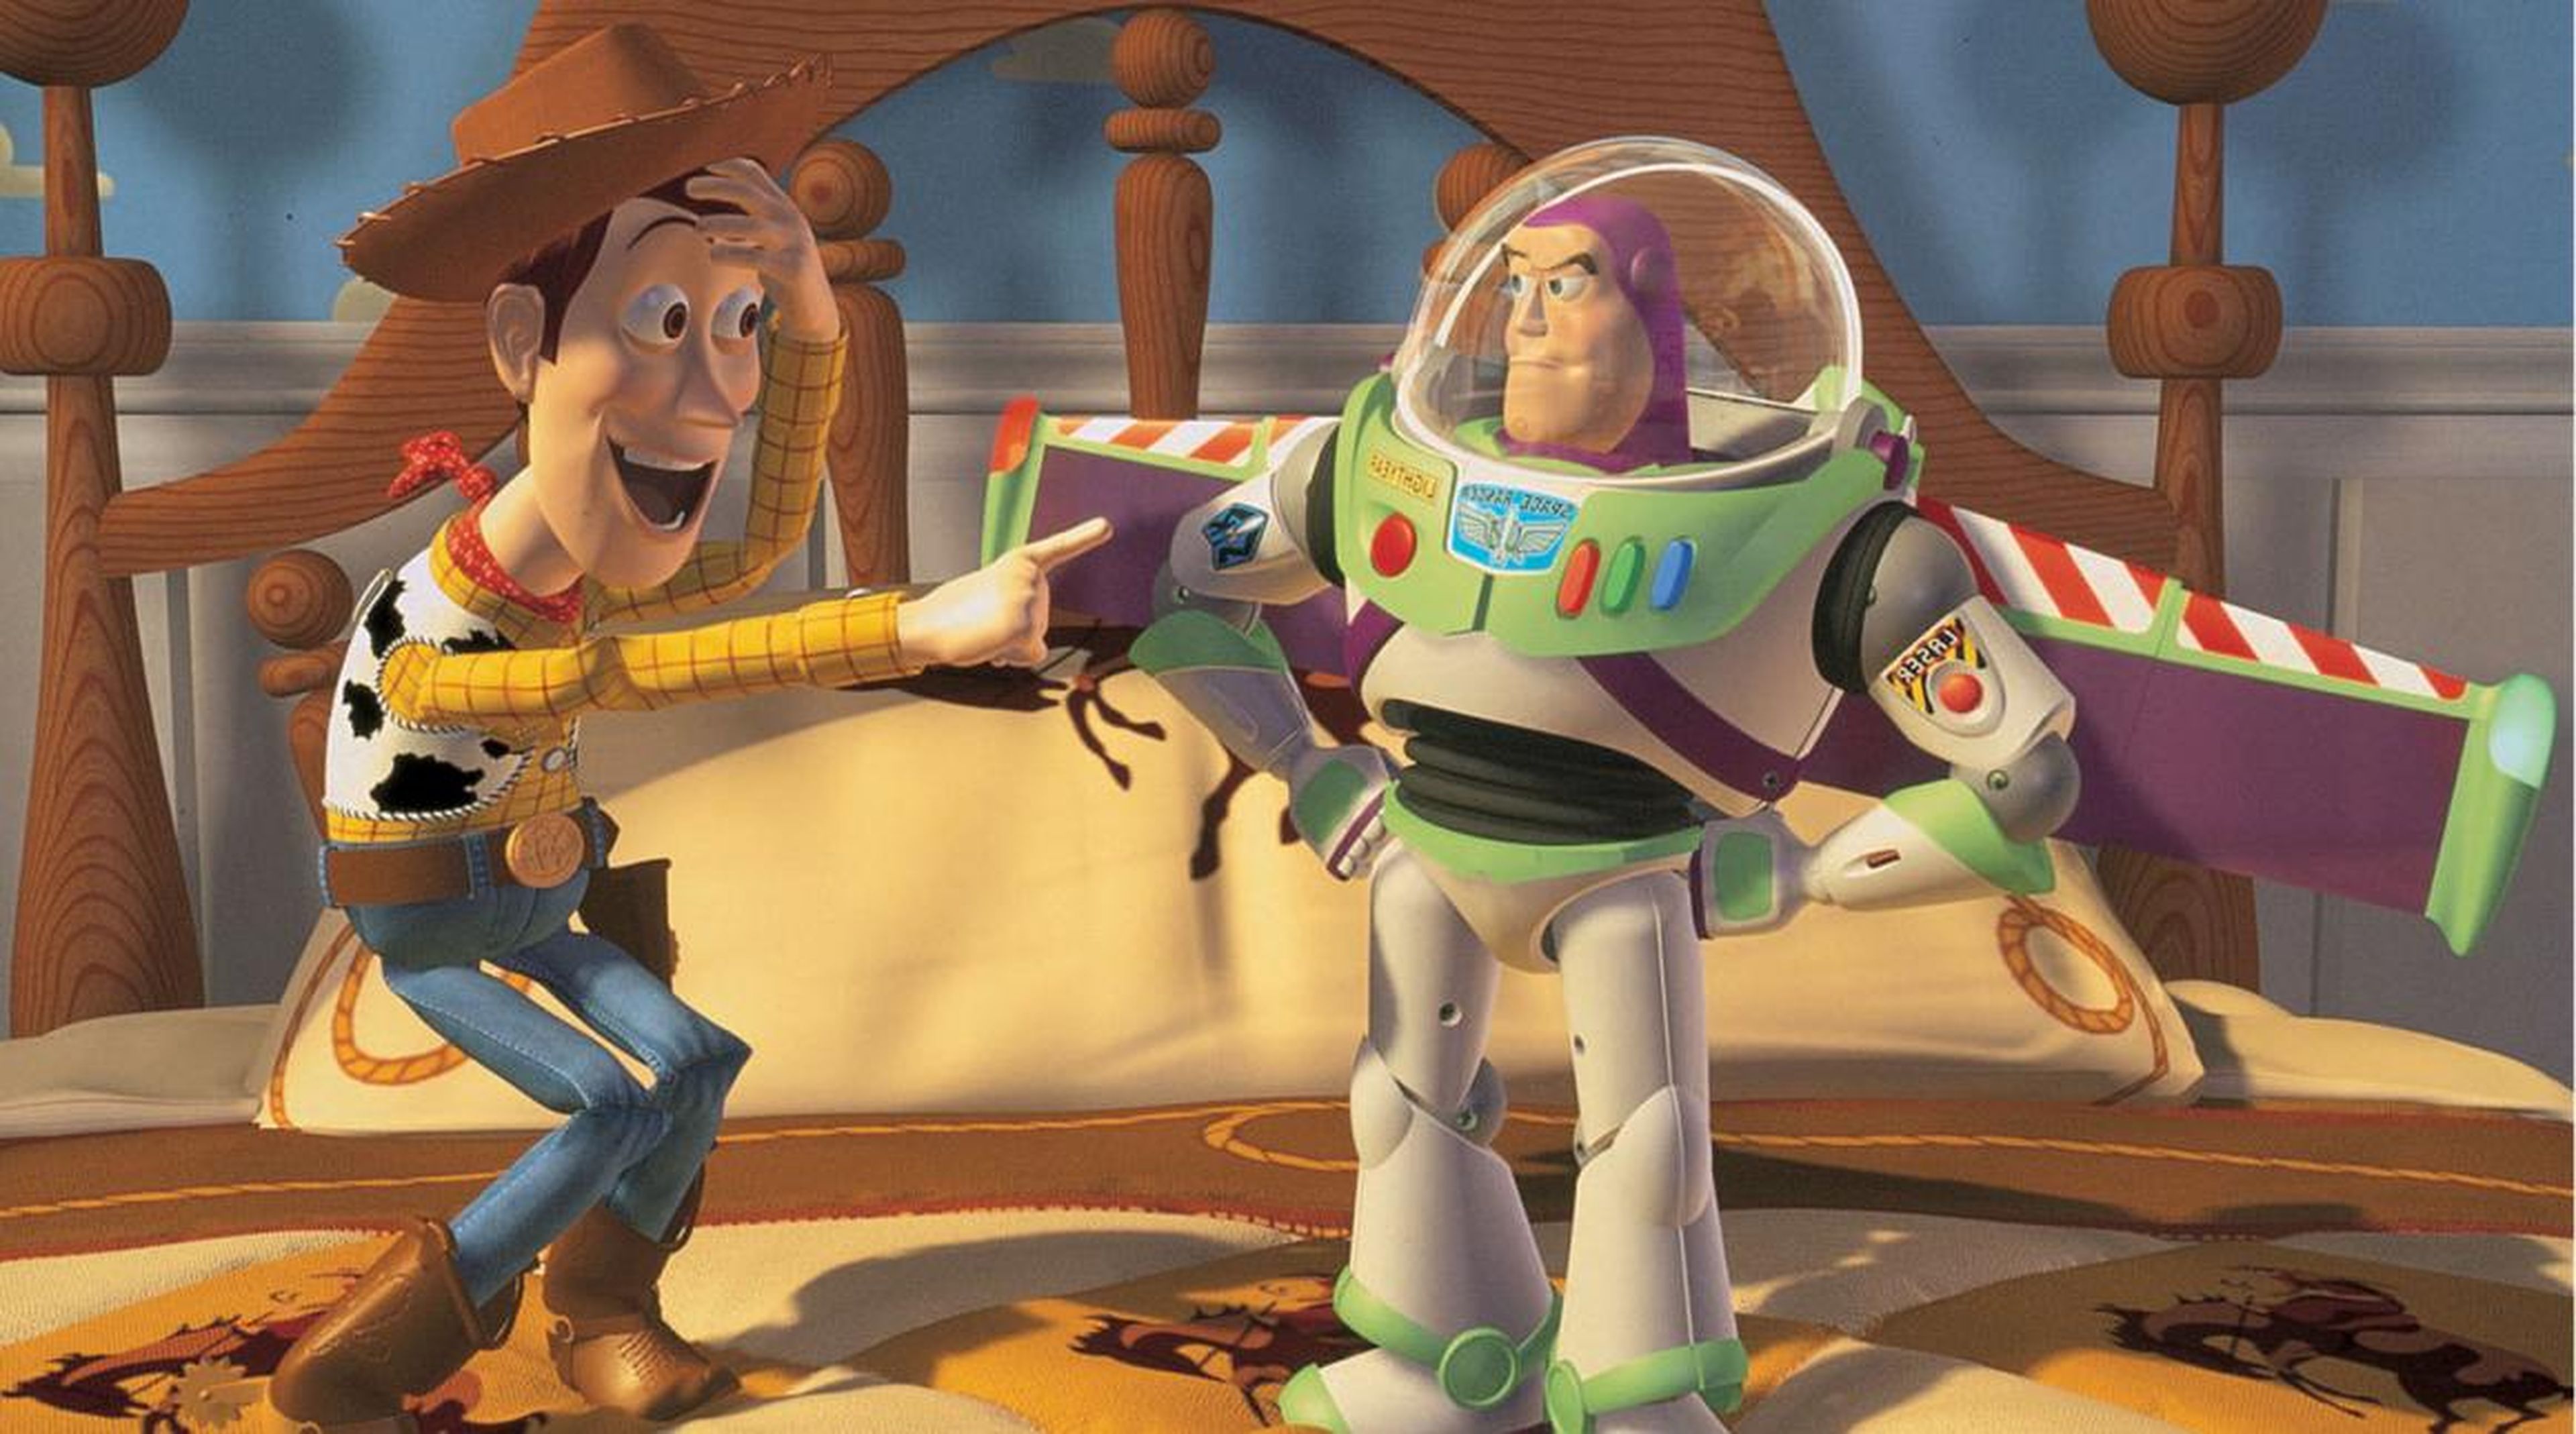 34. "Toy Story" (1995)